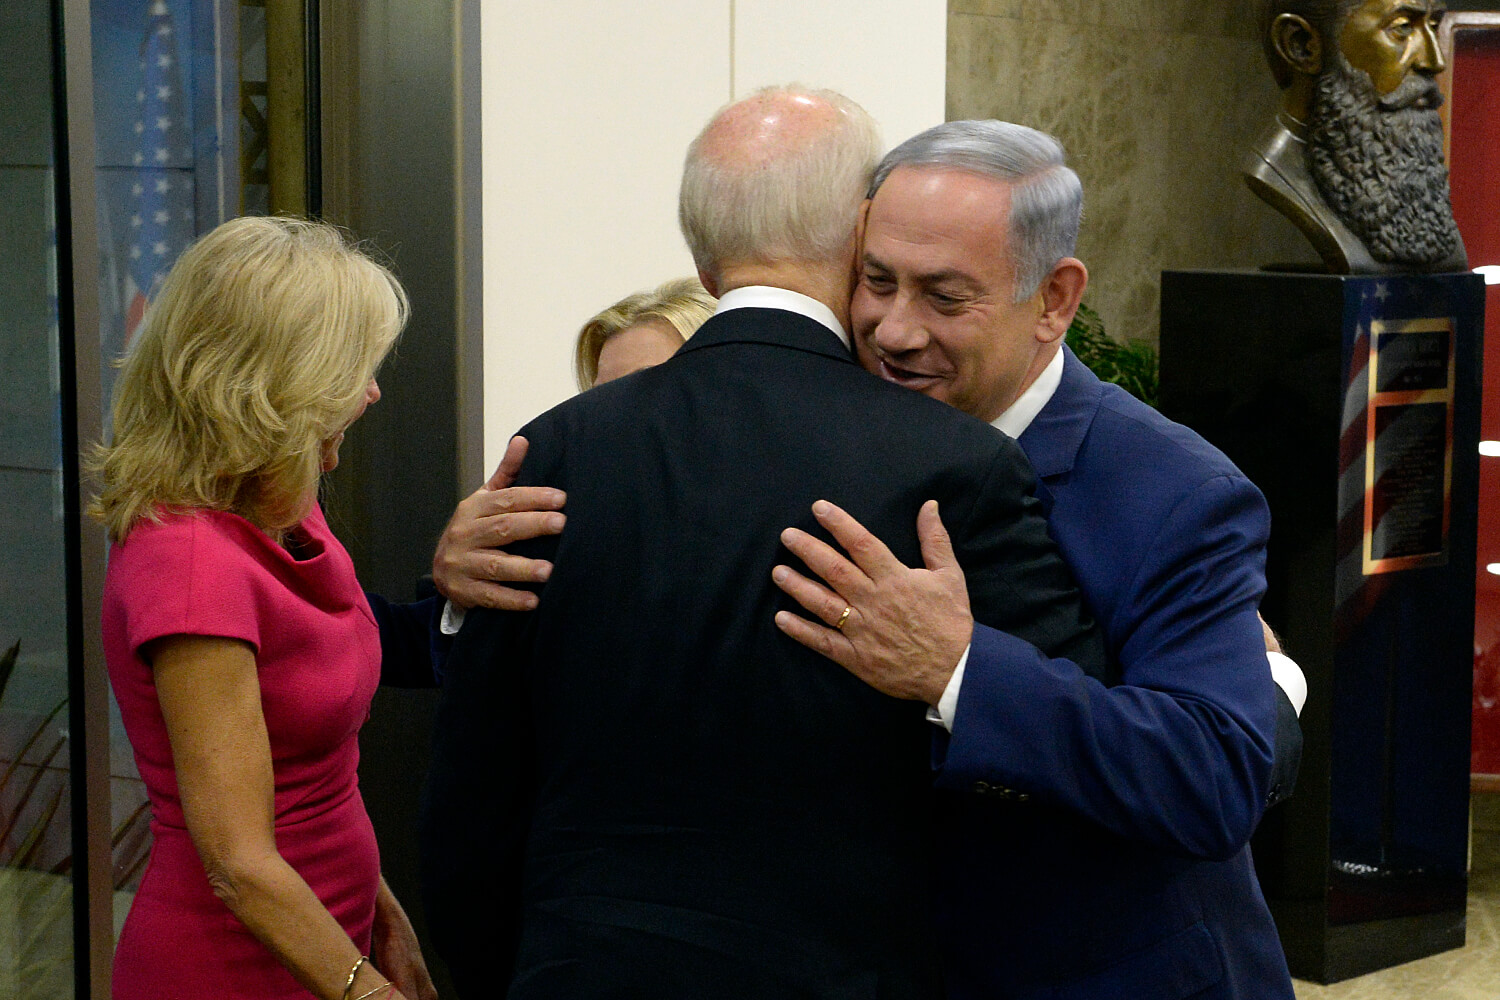 Vice President Joe Biden meets with Prime Minister Benjamin Netanyahu during a visit to Israel on March 9, 2016